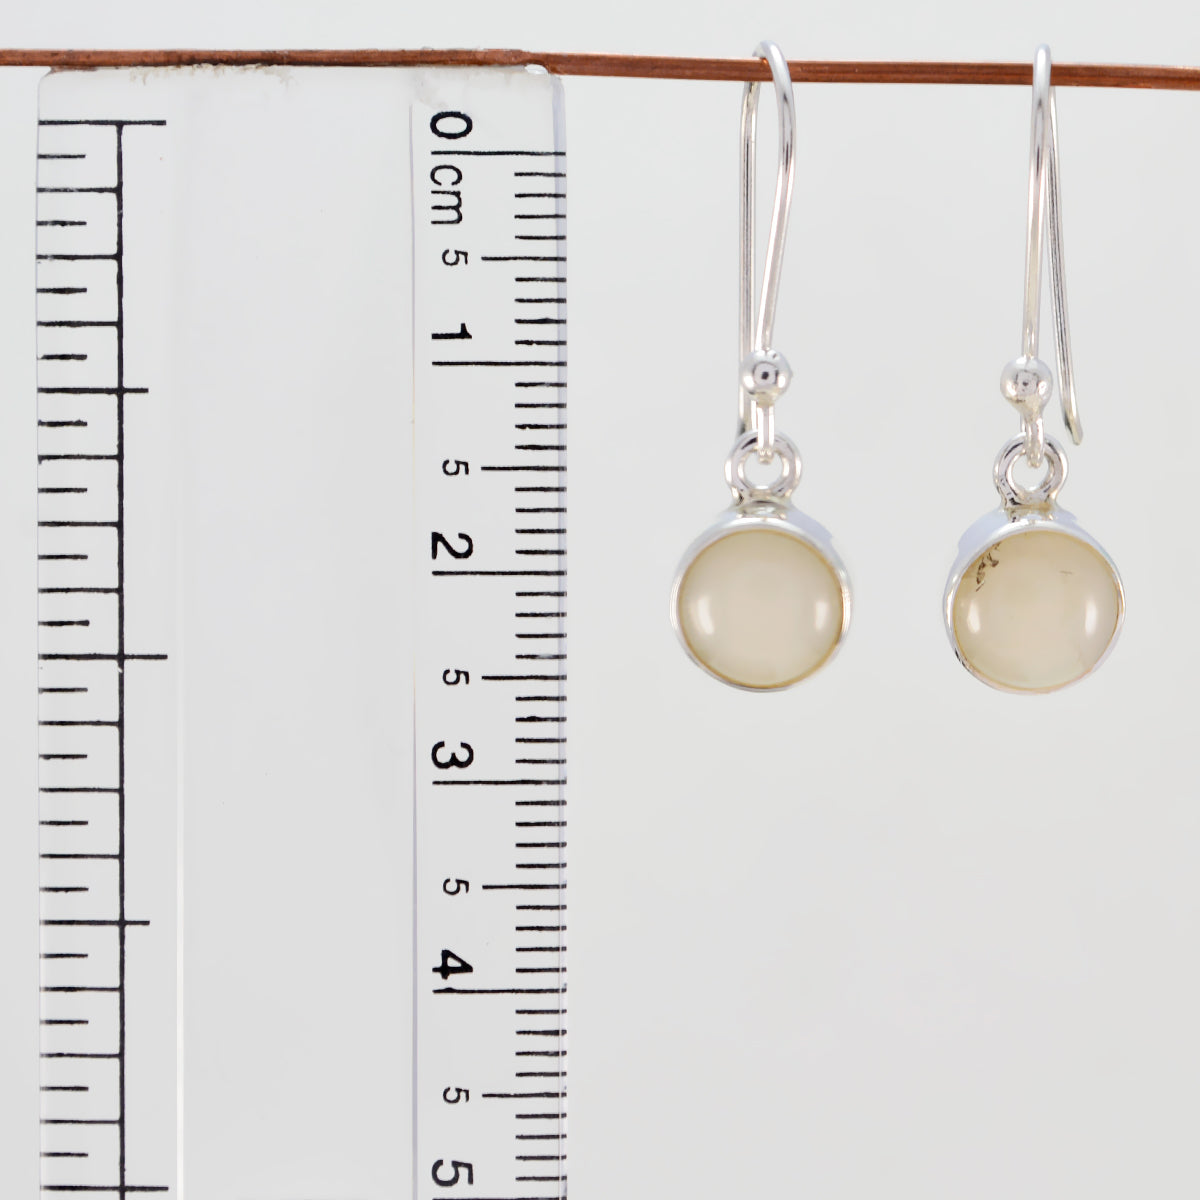 Riyo Real Gemstones round Cabochon White Moonstone Silver Earrings college student gift